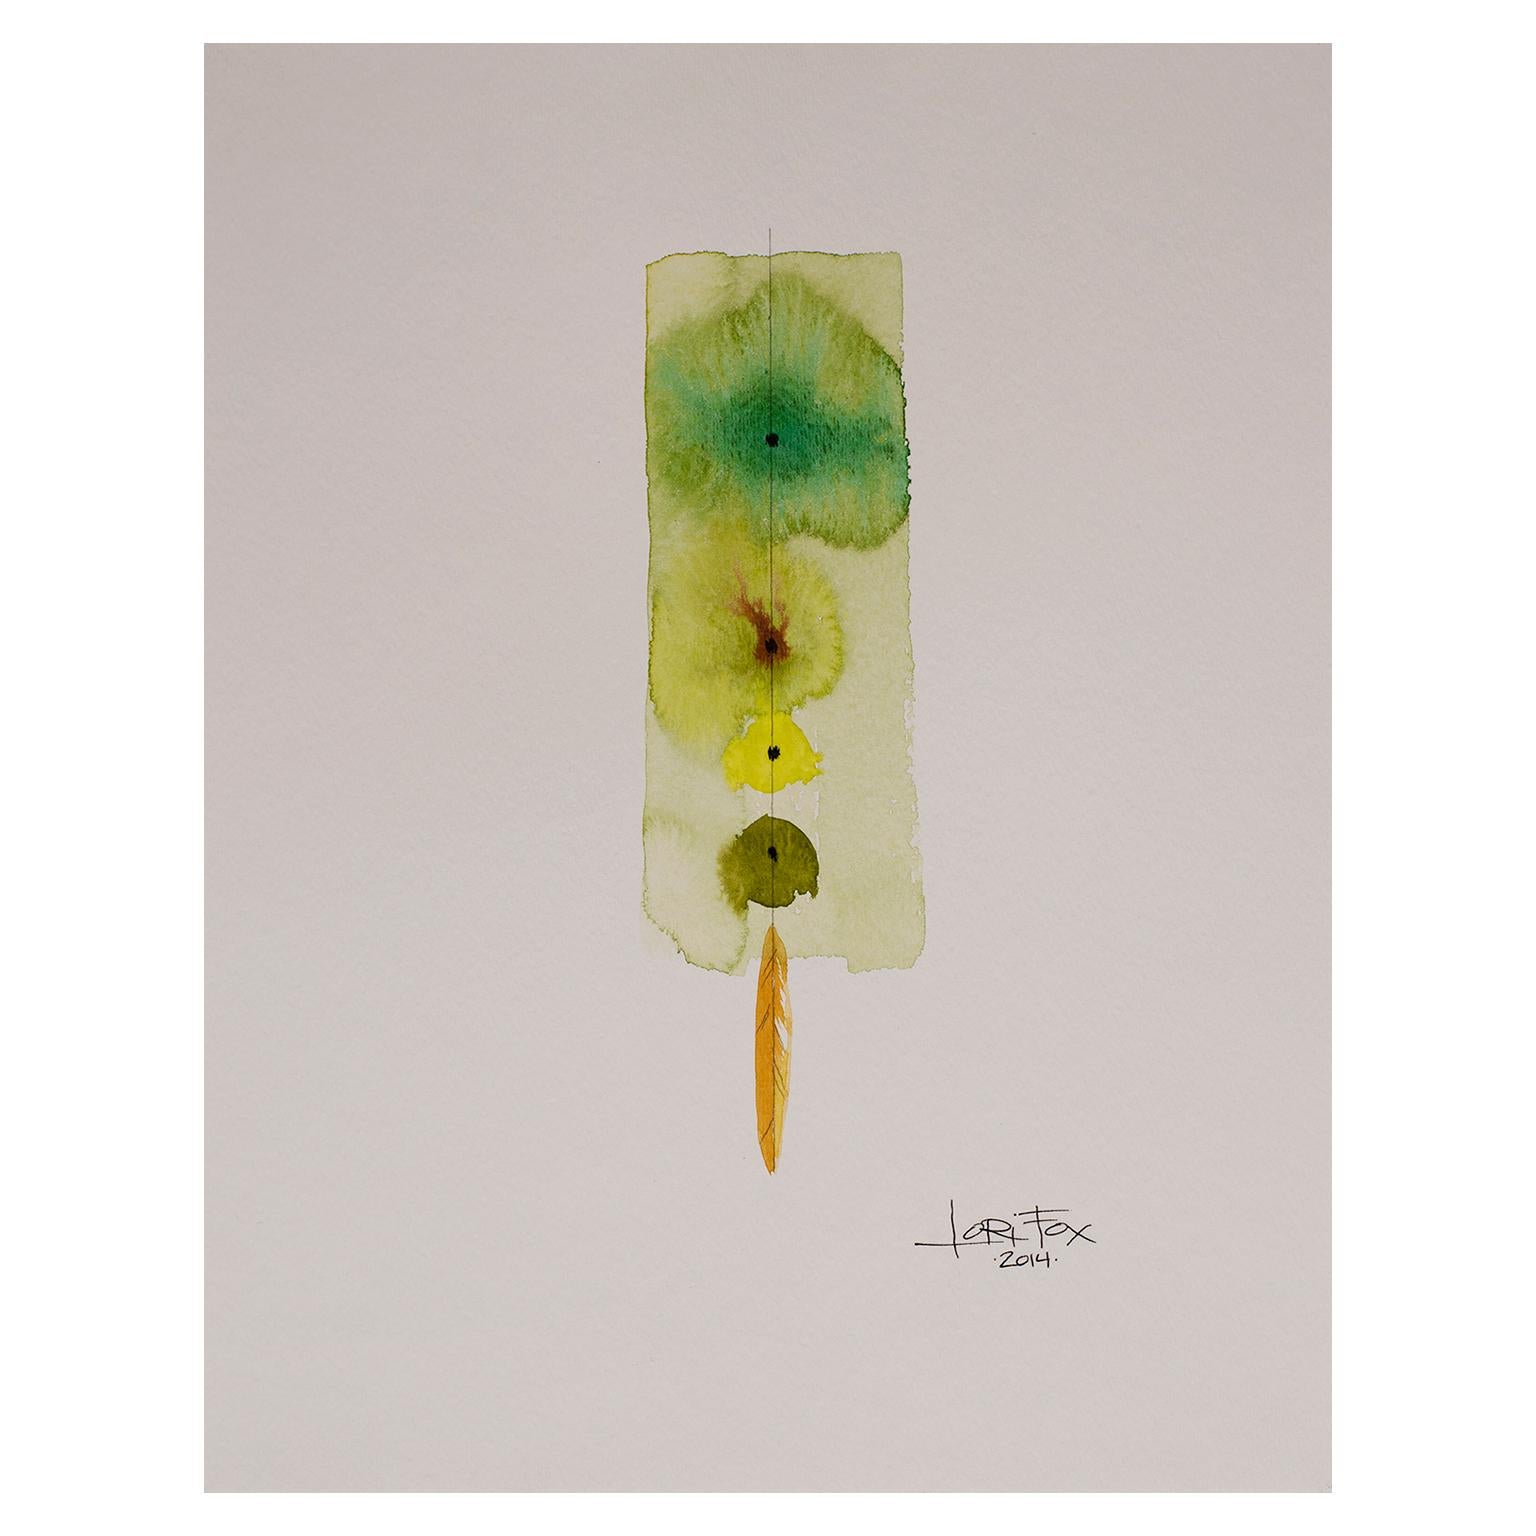 Totem 001 by Lori Fox. Green and yellow hues abstract watercolor and graphite im Angebot 1